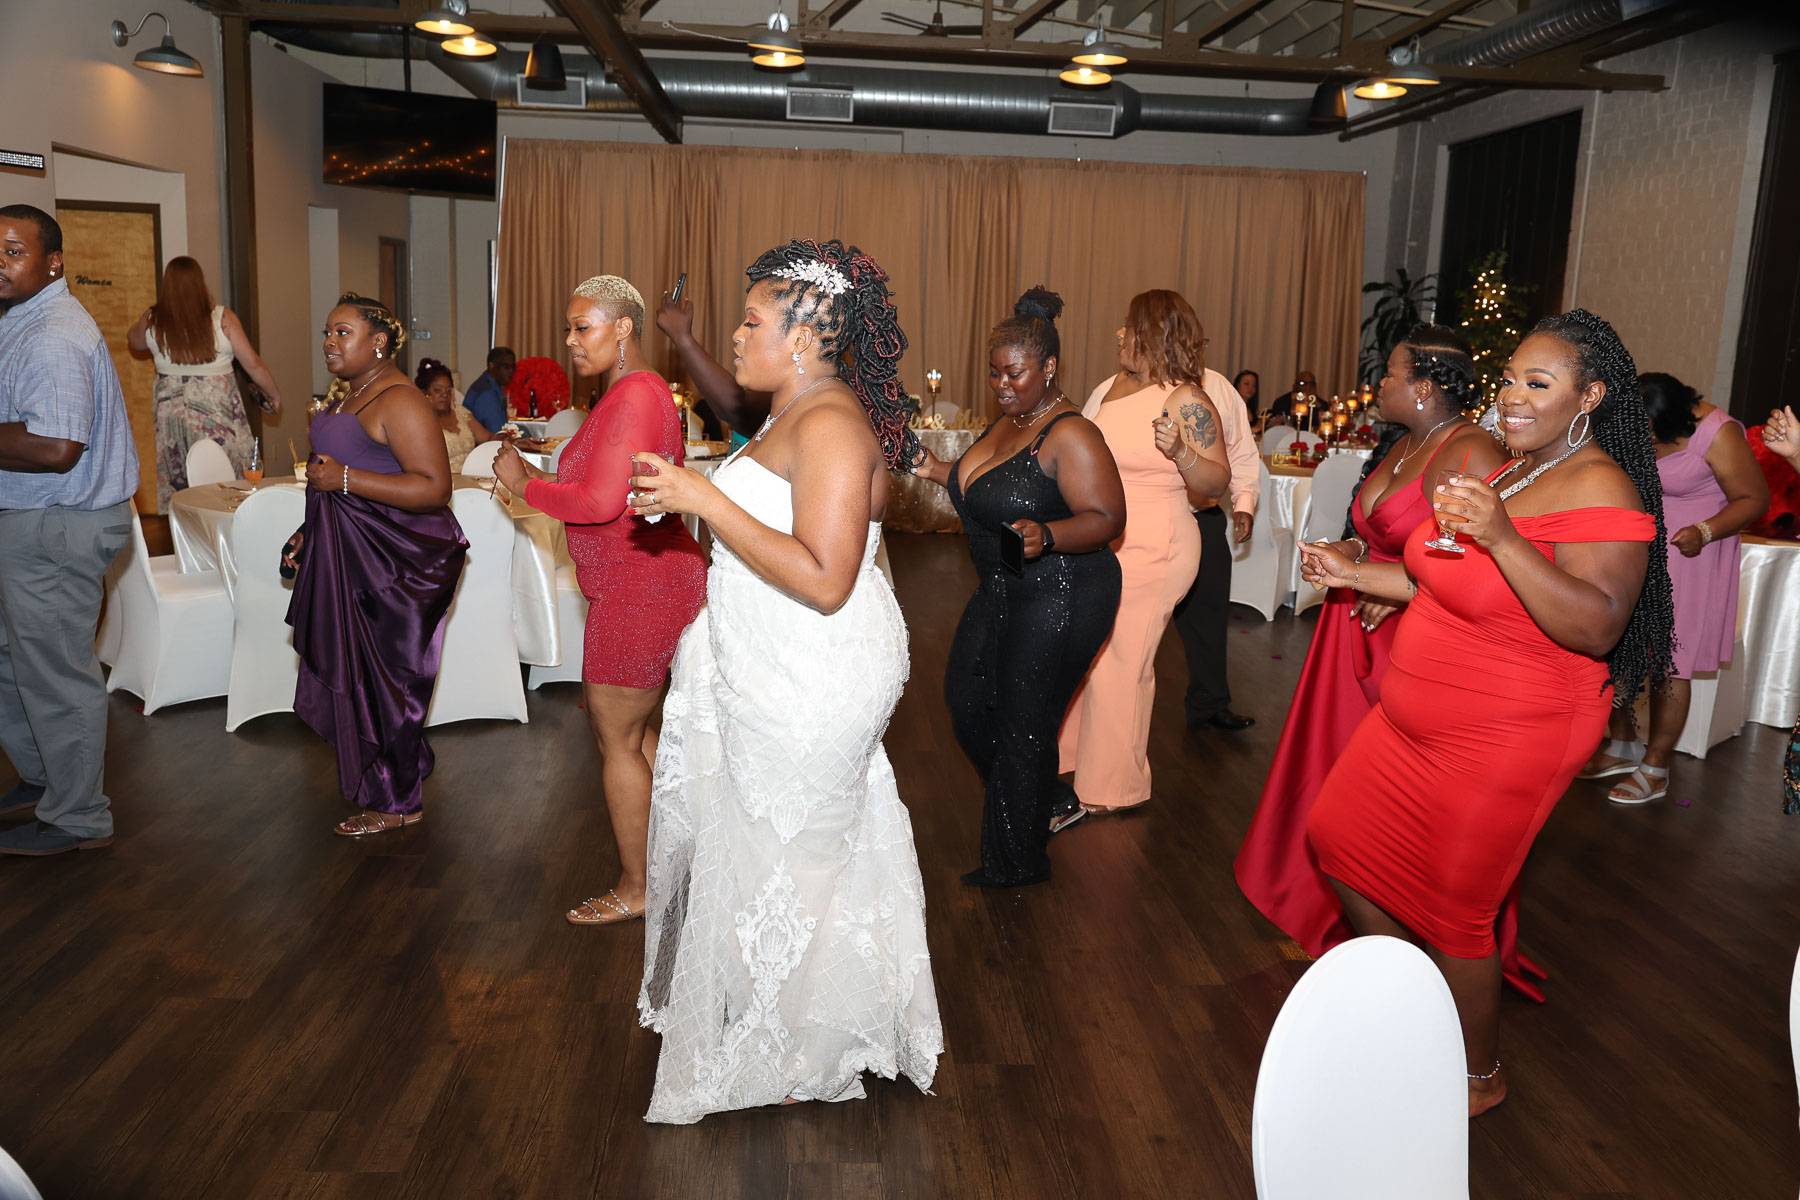 The bride and guests dancing the same style